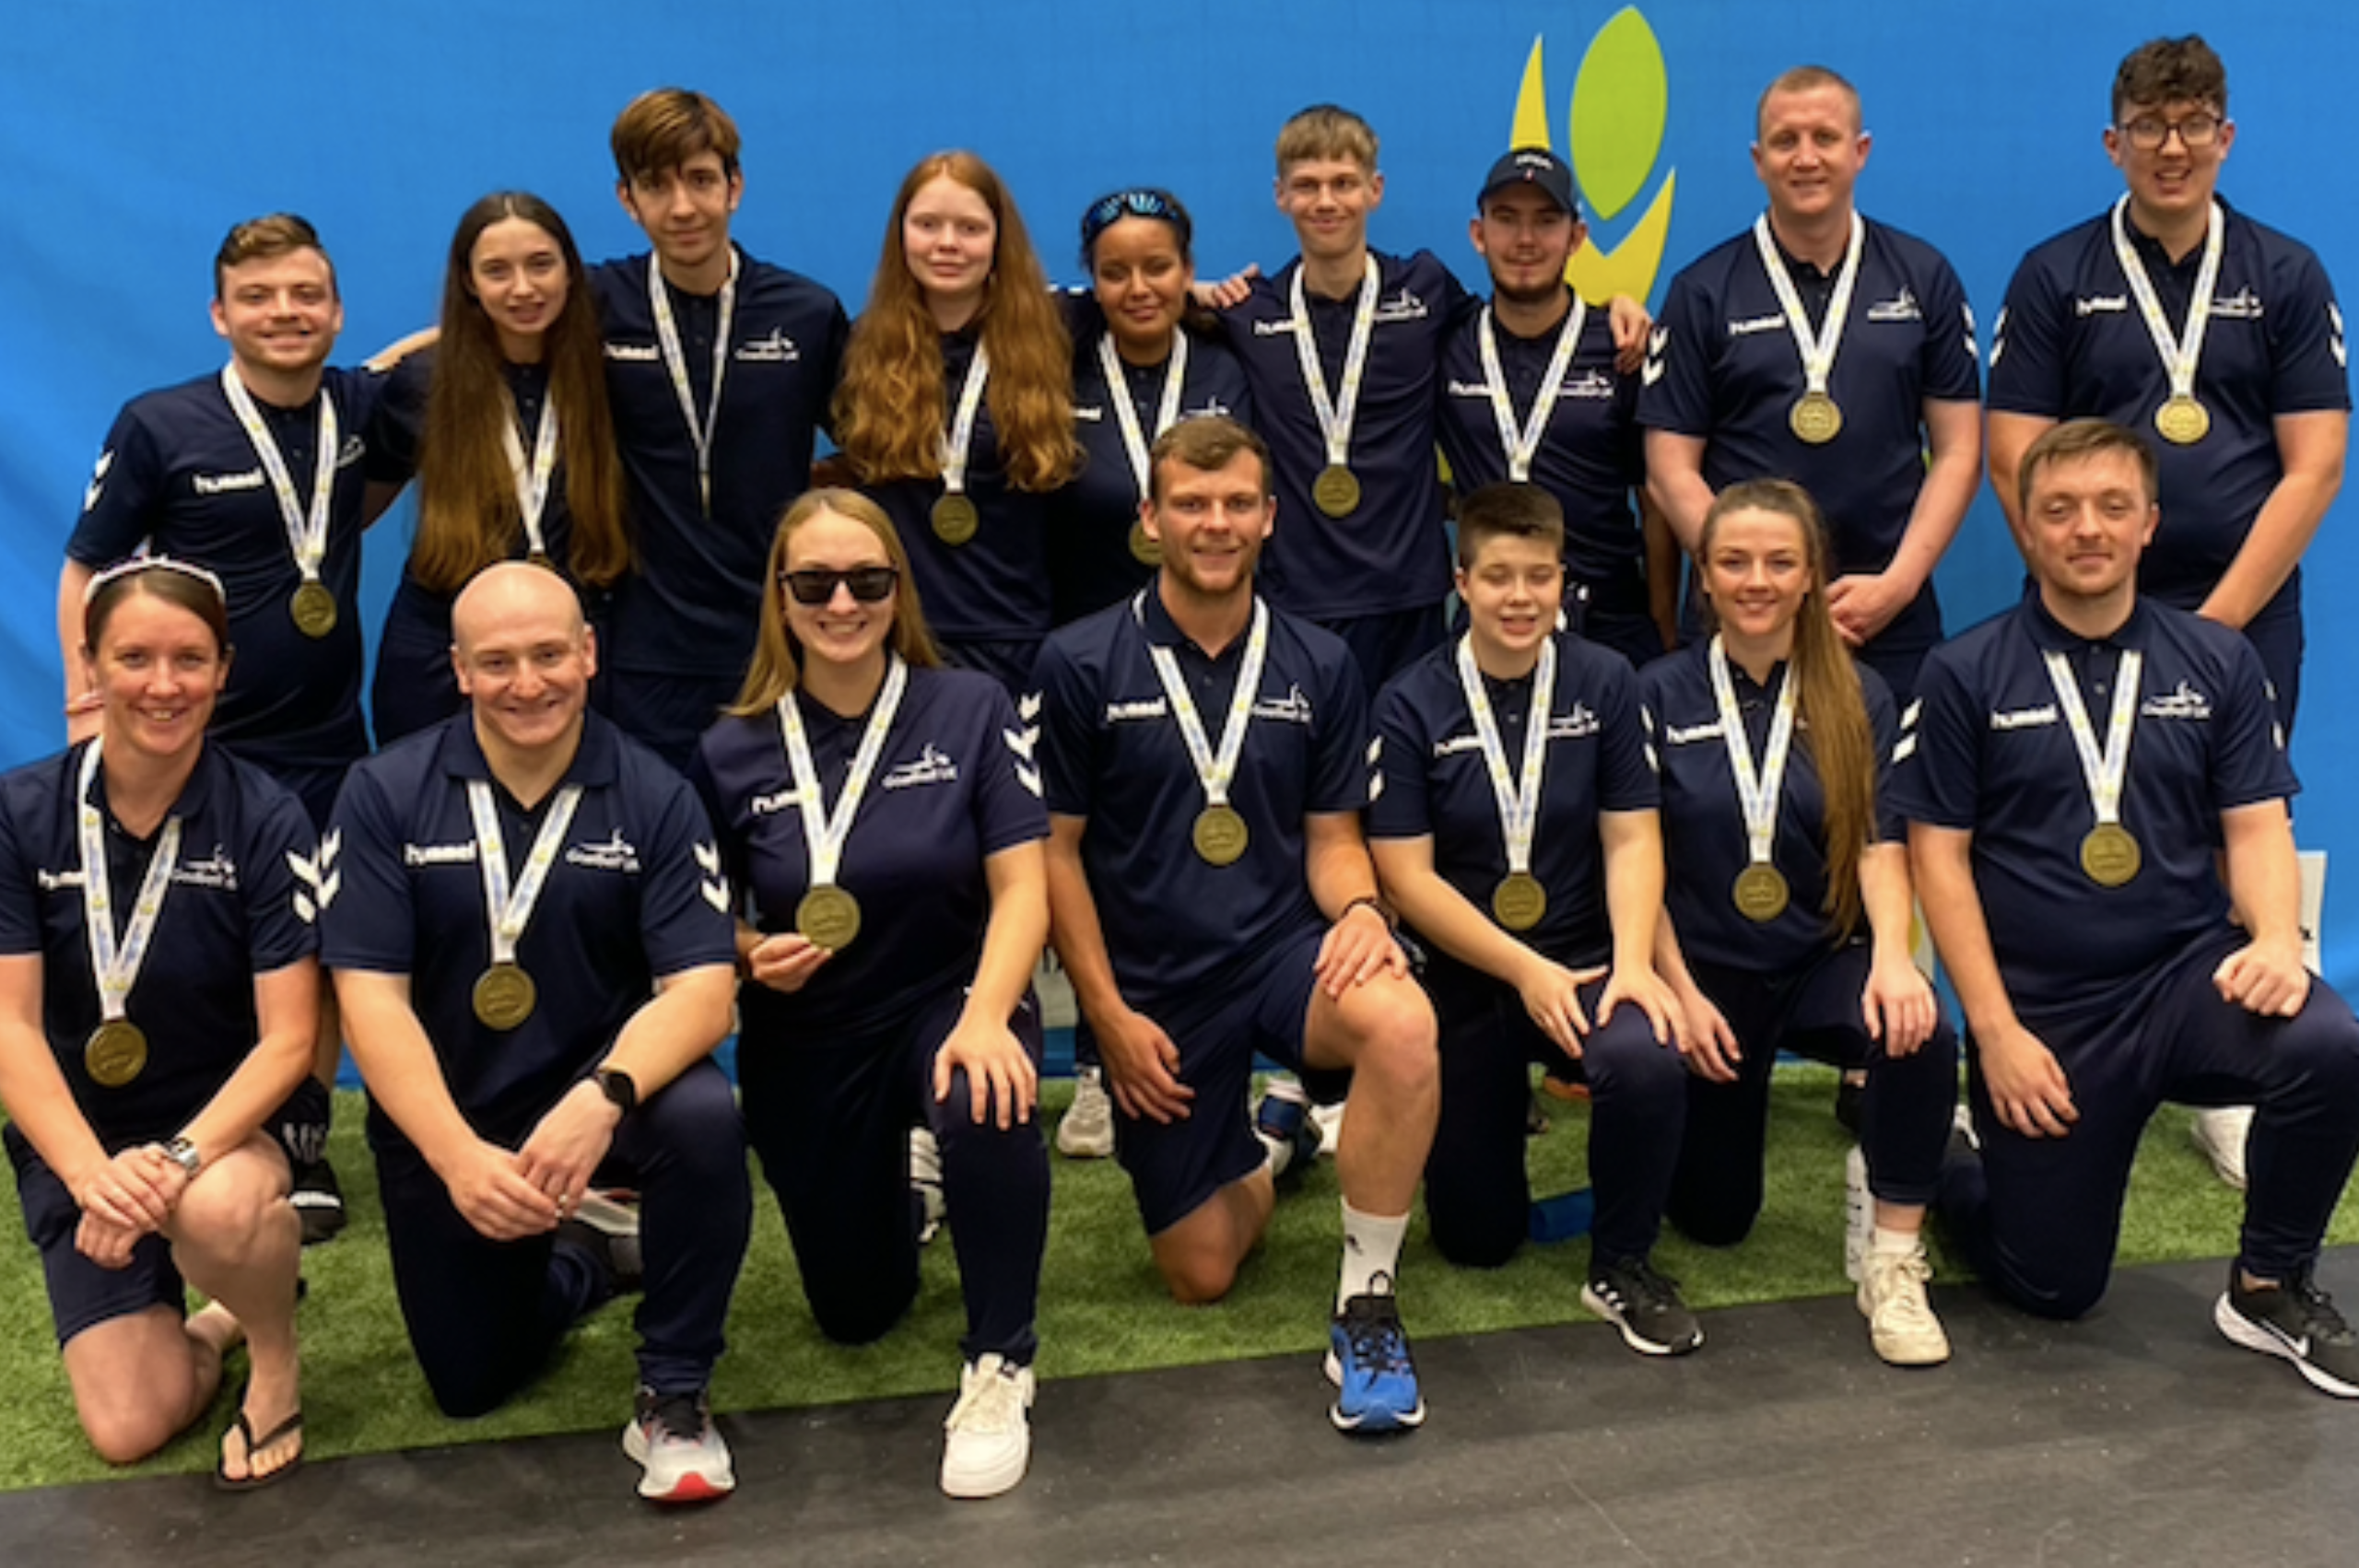 The squad at the European Para Youth Games 2022 all wearing their bronze medals in a group pphoto with the front half kneeling and back half standing